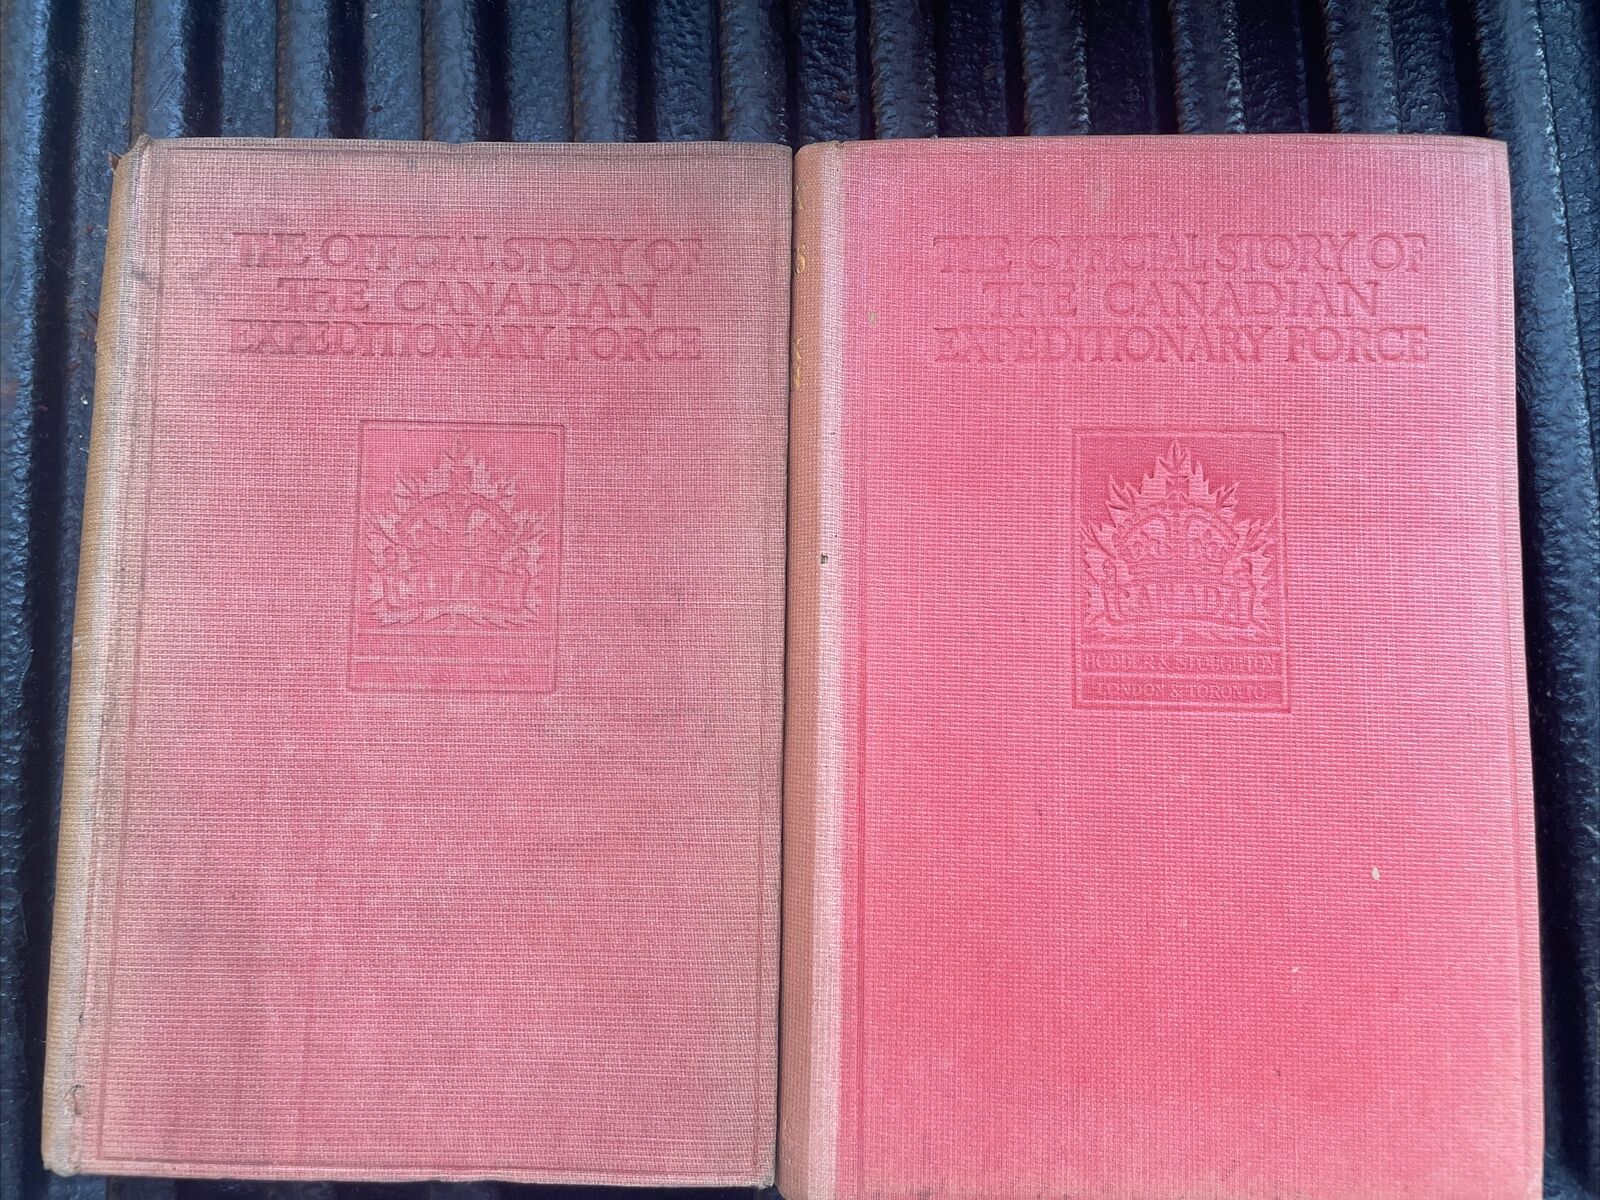 The official story of Canadian Expeditionary Force Volumes I & II in Flanders